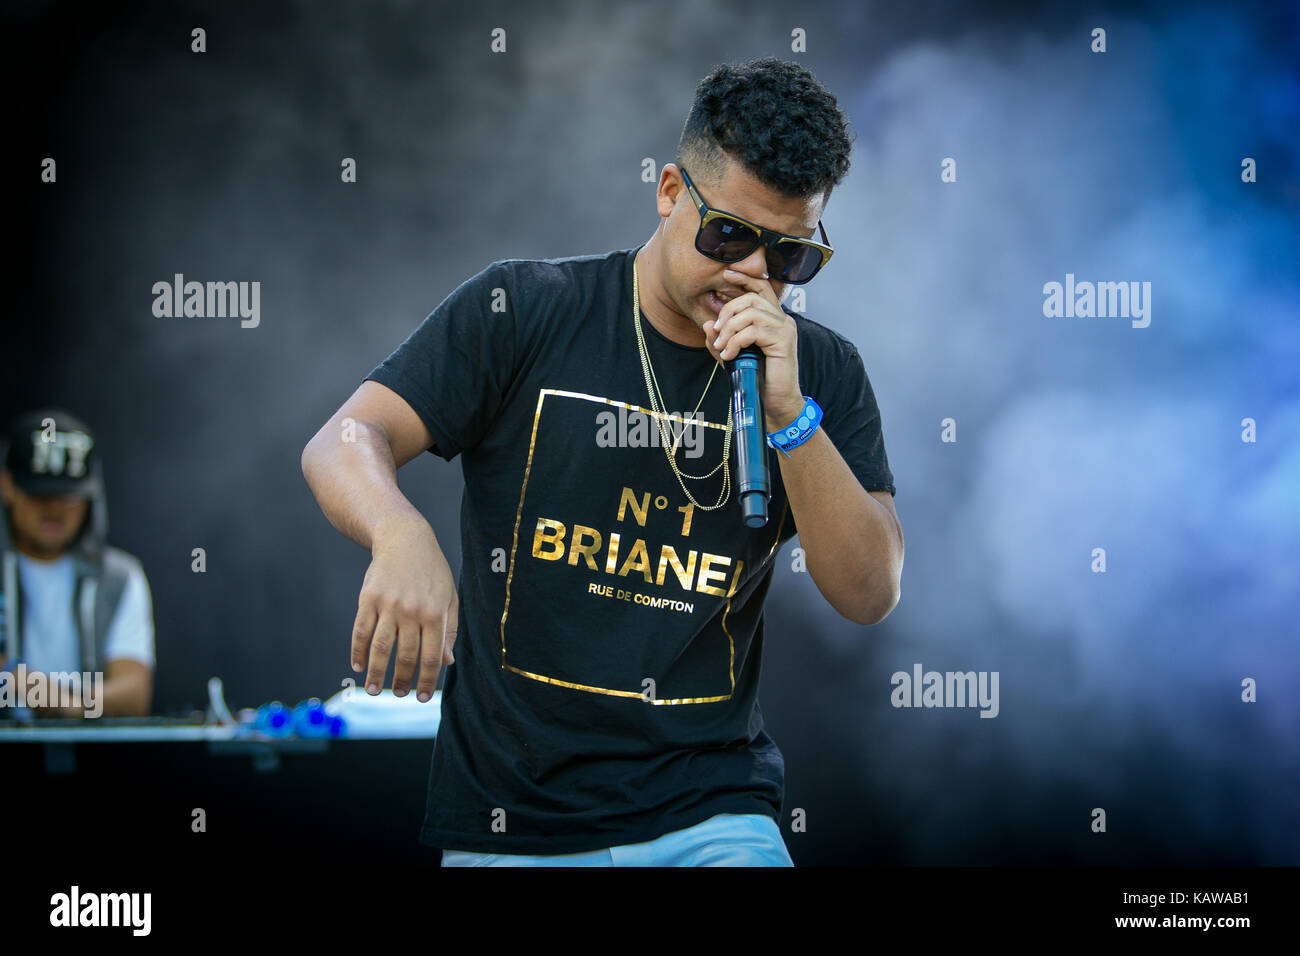 The American pop, R&B and hip hop recording artist Makonnen Sharon is best  known by his stage name ILoveMakonnen and here performs a live concert at  the Norwegian music festival Øyafestivalen 2015